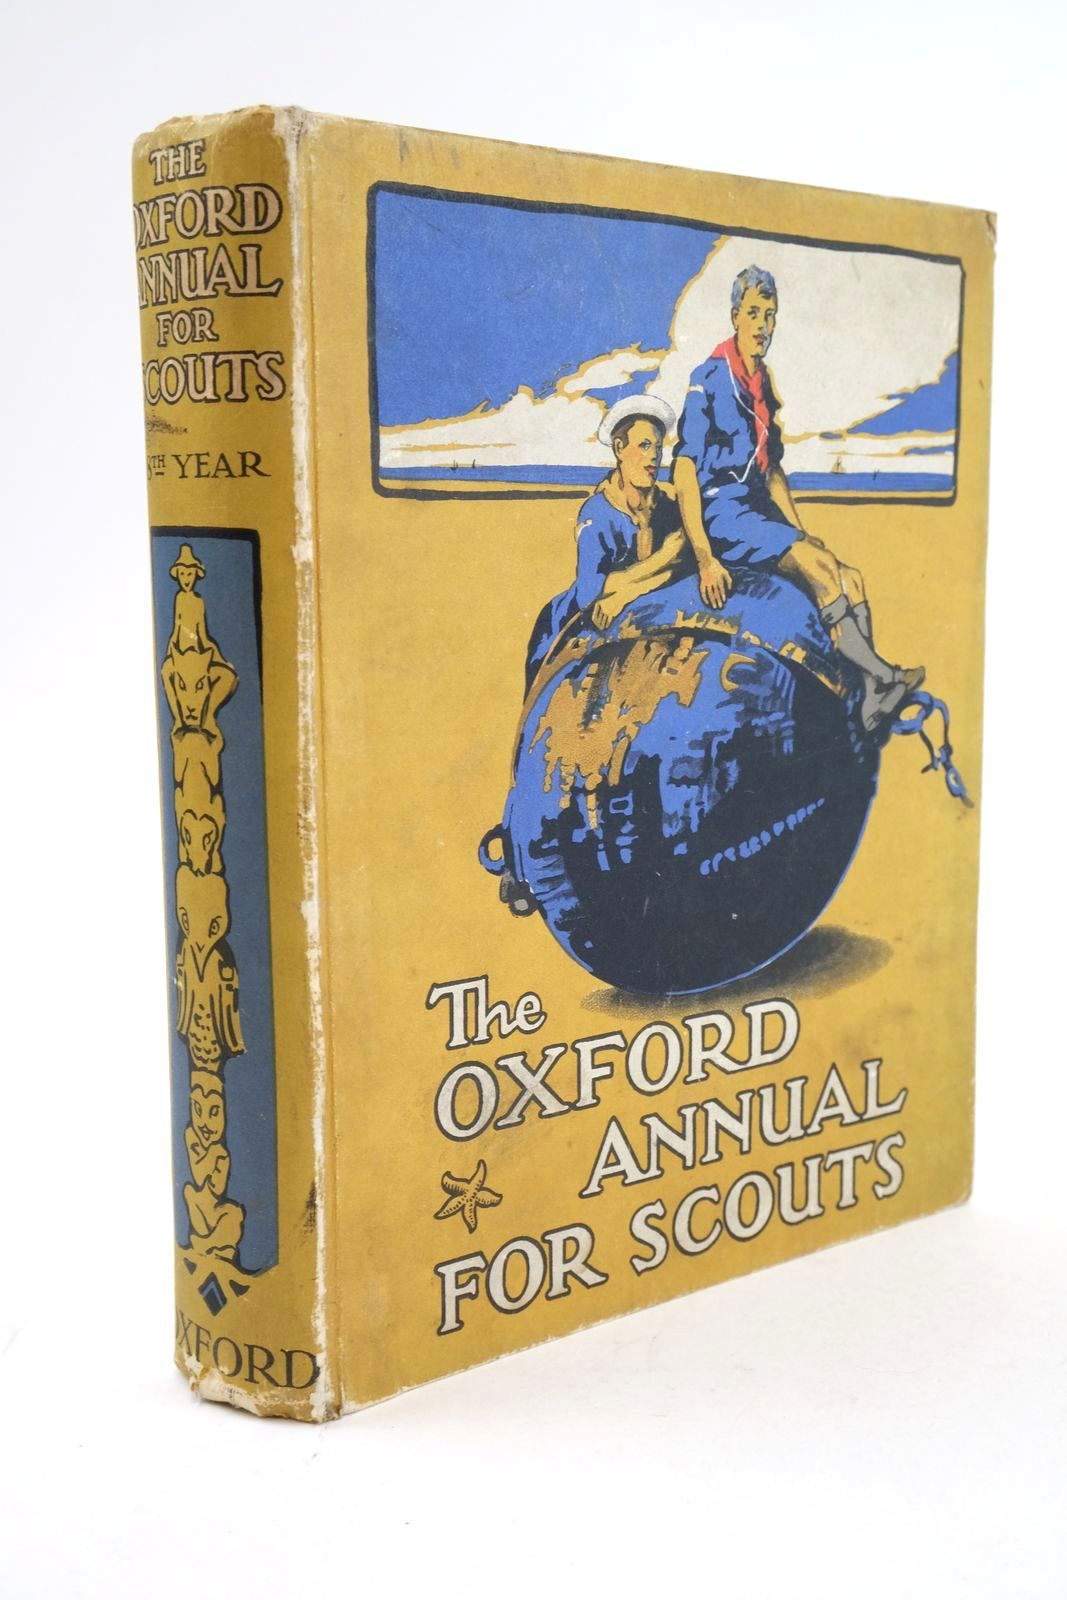 Photo of THE OXFORD ANNUAL FOR SCOUTS 8TH YEAR written by Strang, Herbert Markham, Harold Gorman, Major J.T. et al, illustrated by Coales, K.W. Silas, Ellis Lumley, Savile et al., published by Oxford University Press, Humphrey Milford (STOCK CODE: 1325097)  for sale by Stella & Rose's Books